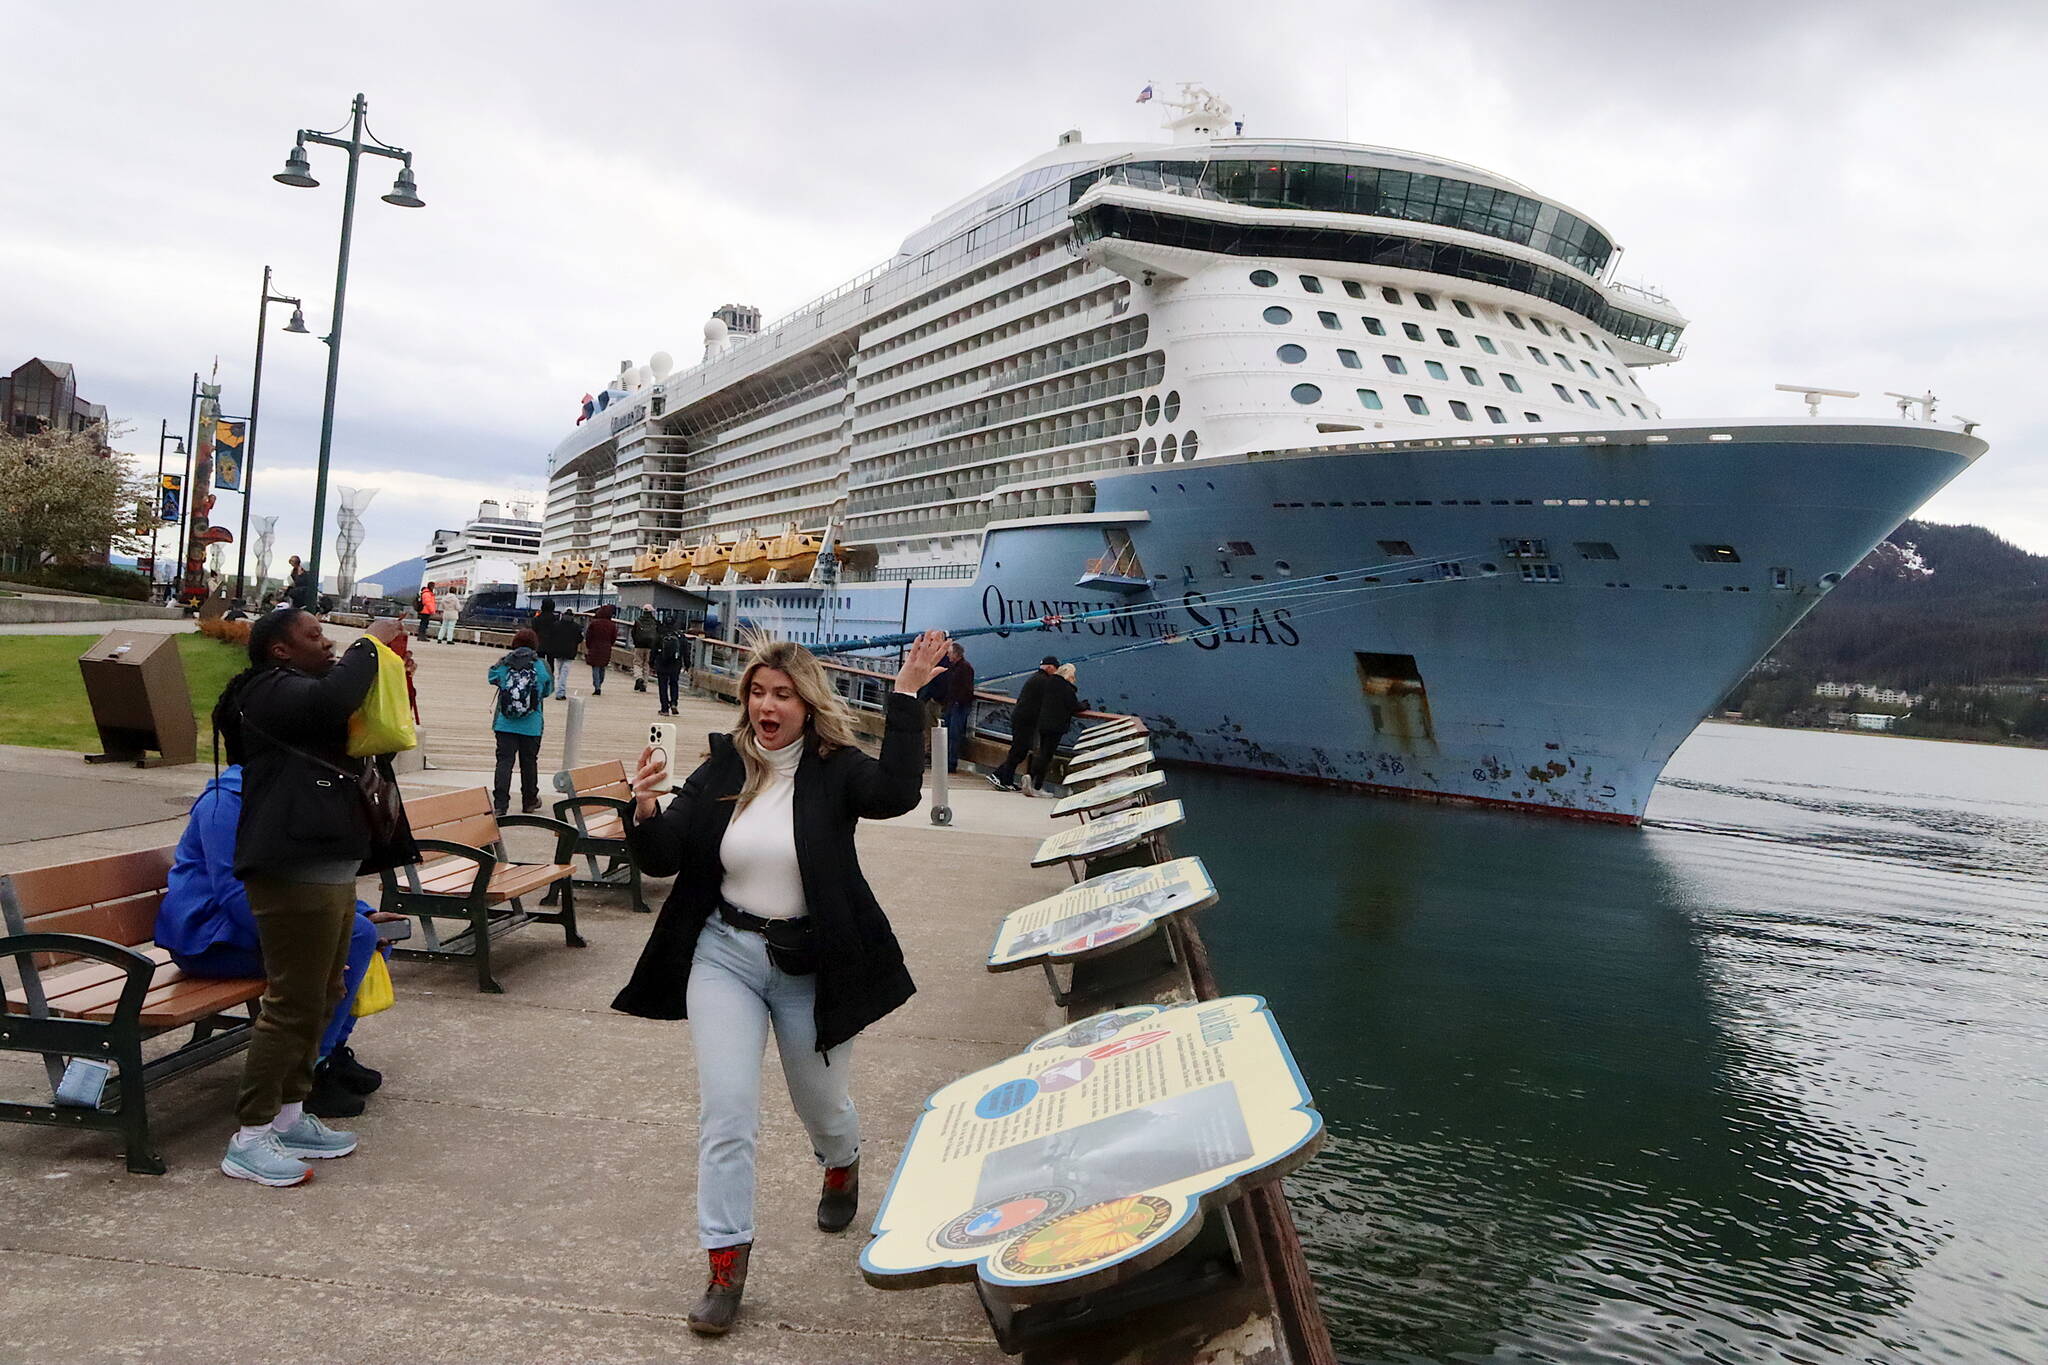 Jasmine Chavez, a crew member aboard the Quantum of the Seas cruise ship, waves to her family during a cell phone conversation after disembarking from the ship at Marine Park on May 10. (Mark Sabbatini / Juneau Empire file photo)